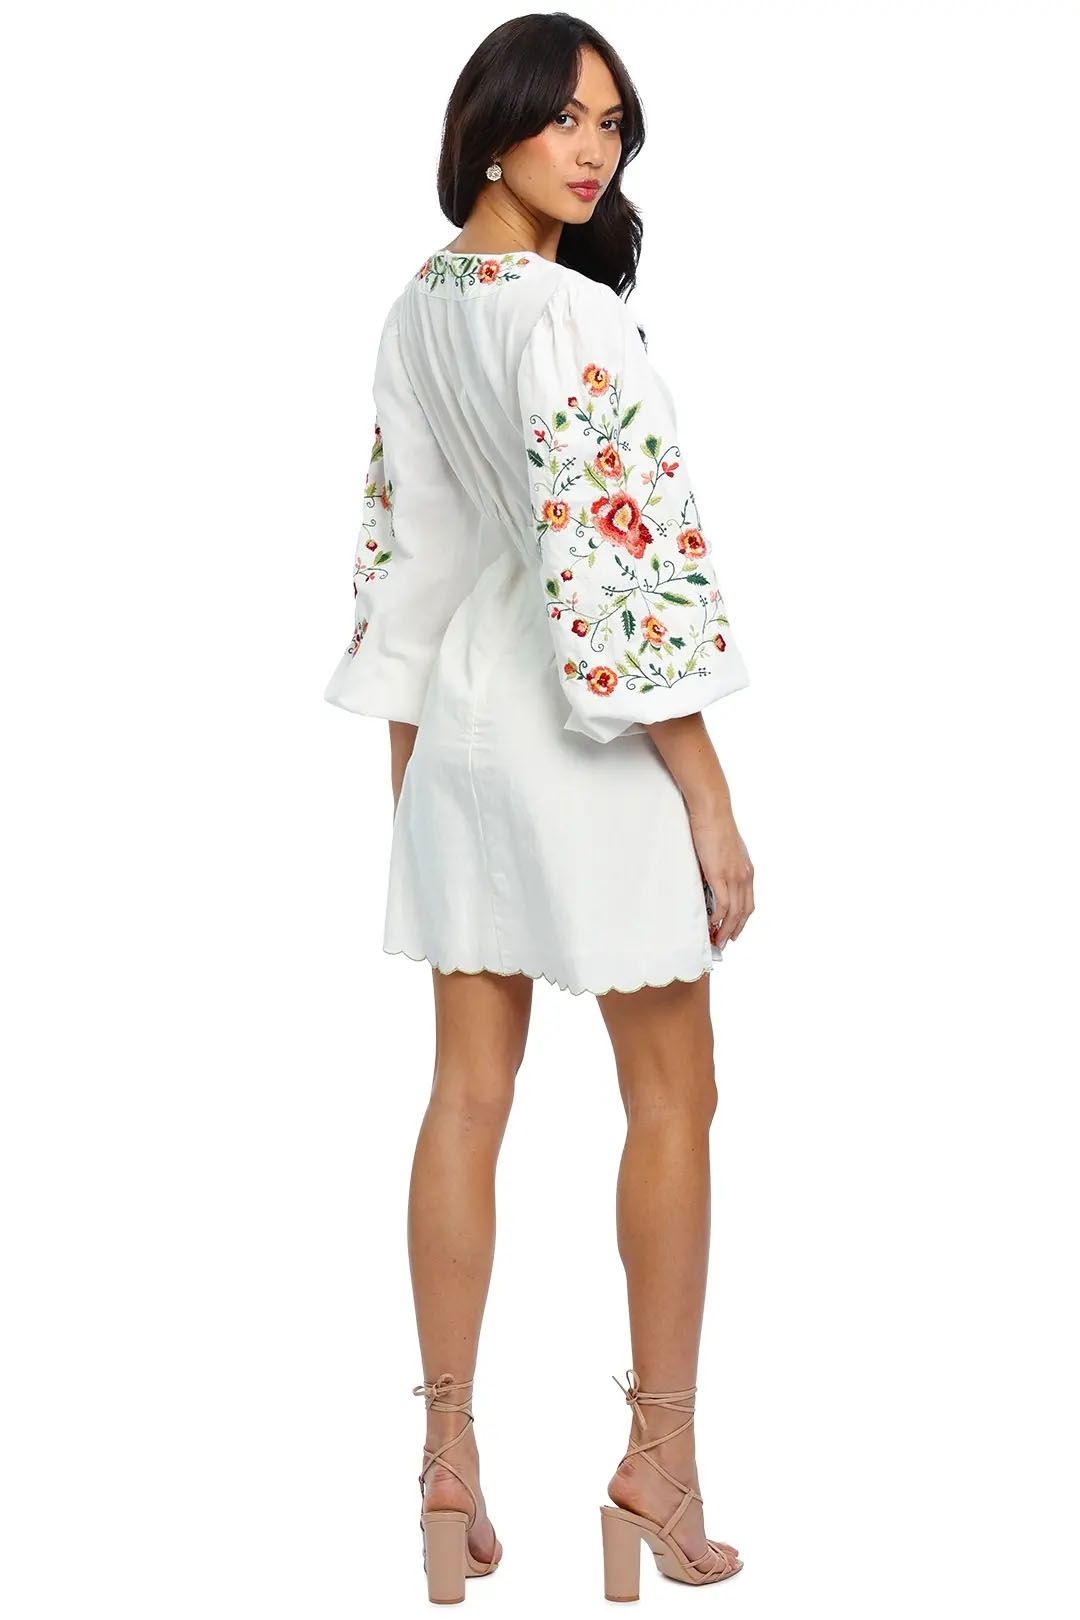 Ministry of Style Gardenia Dress Ivory floral